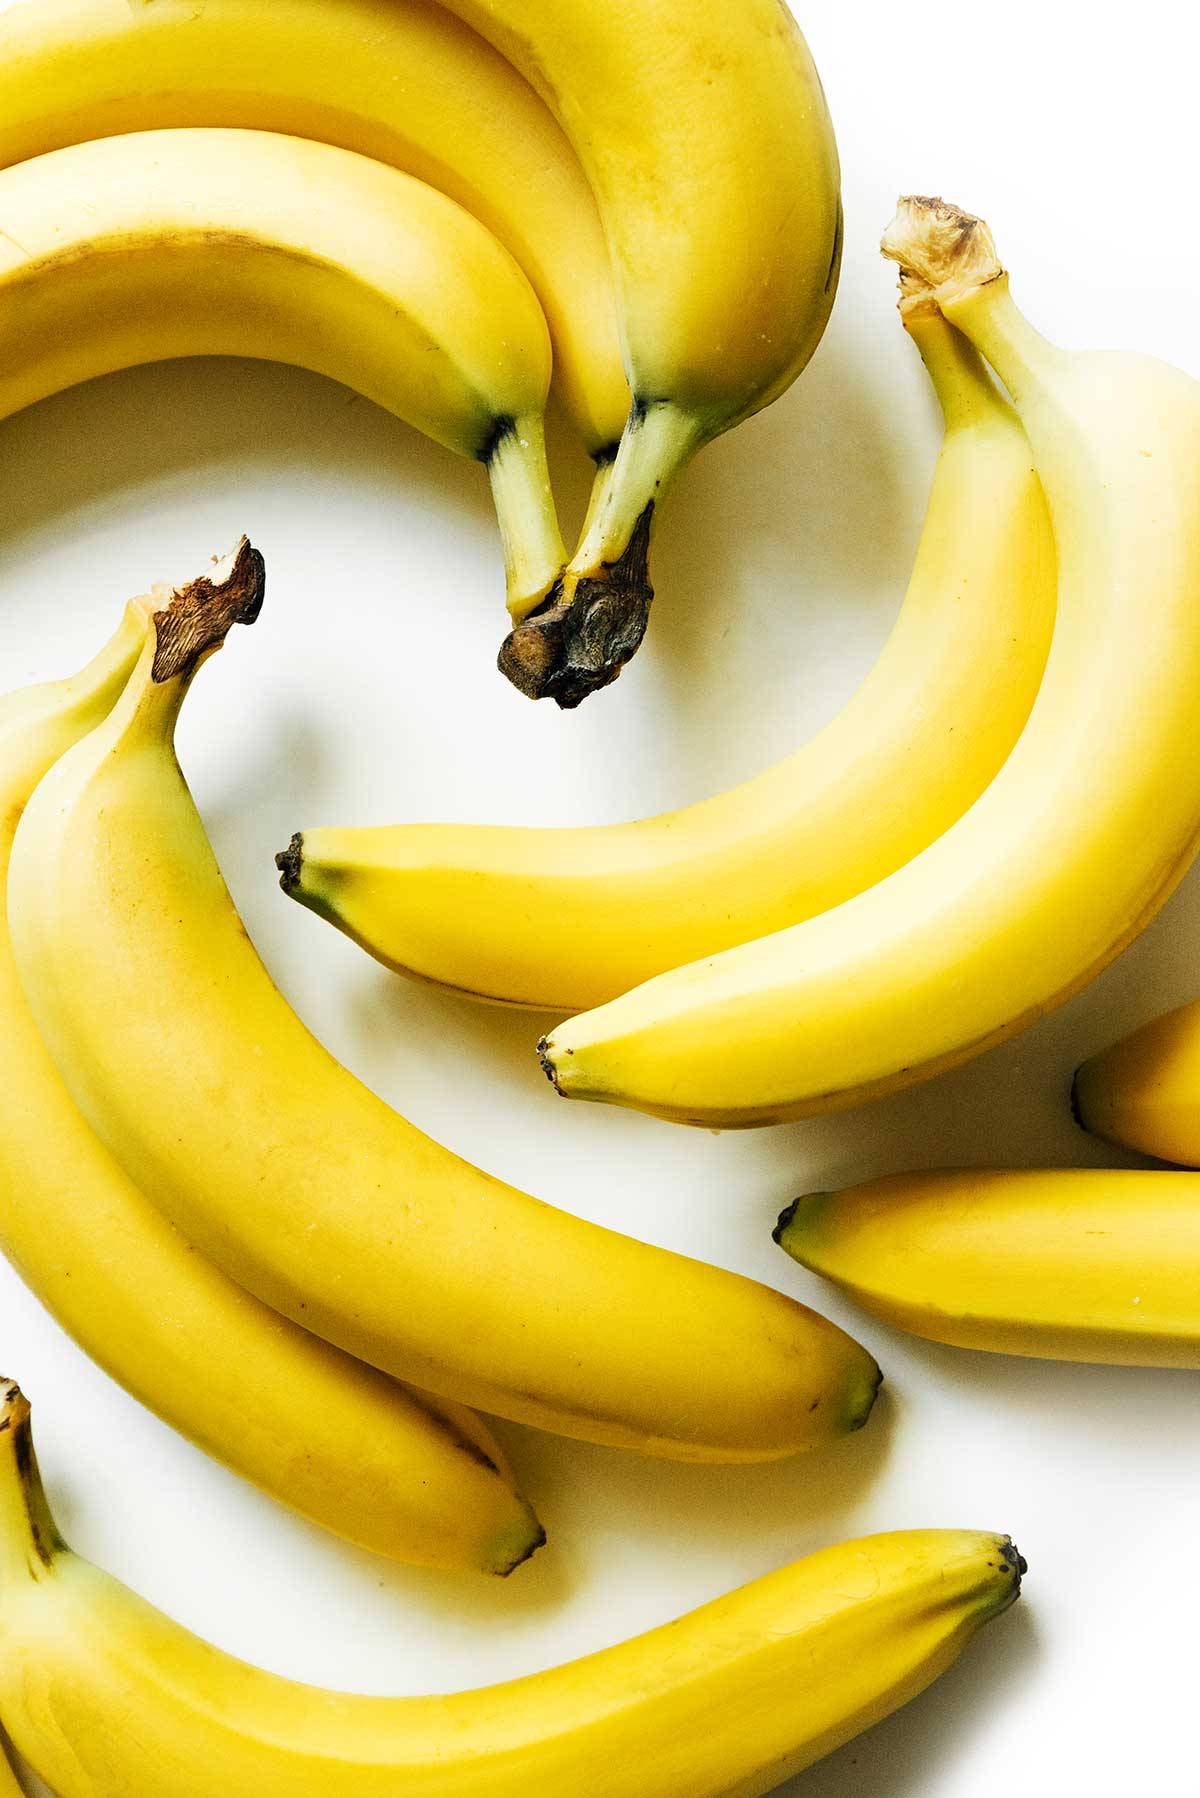 Bananas 101: Everything You Need To Know (ripening, storing, nutrition)